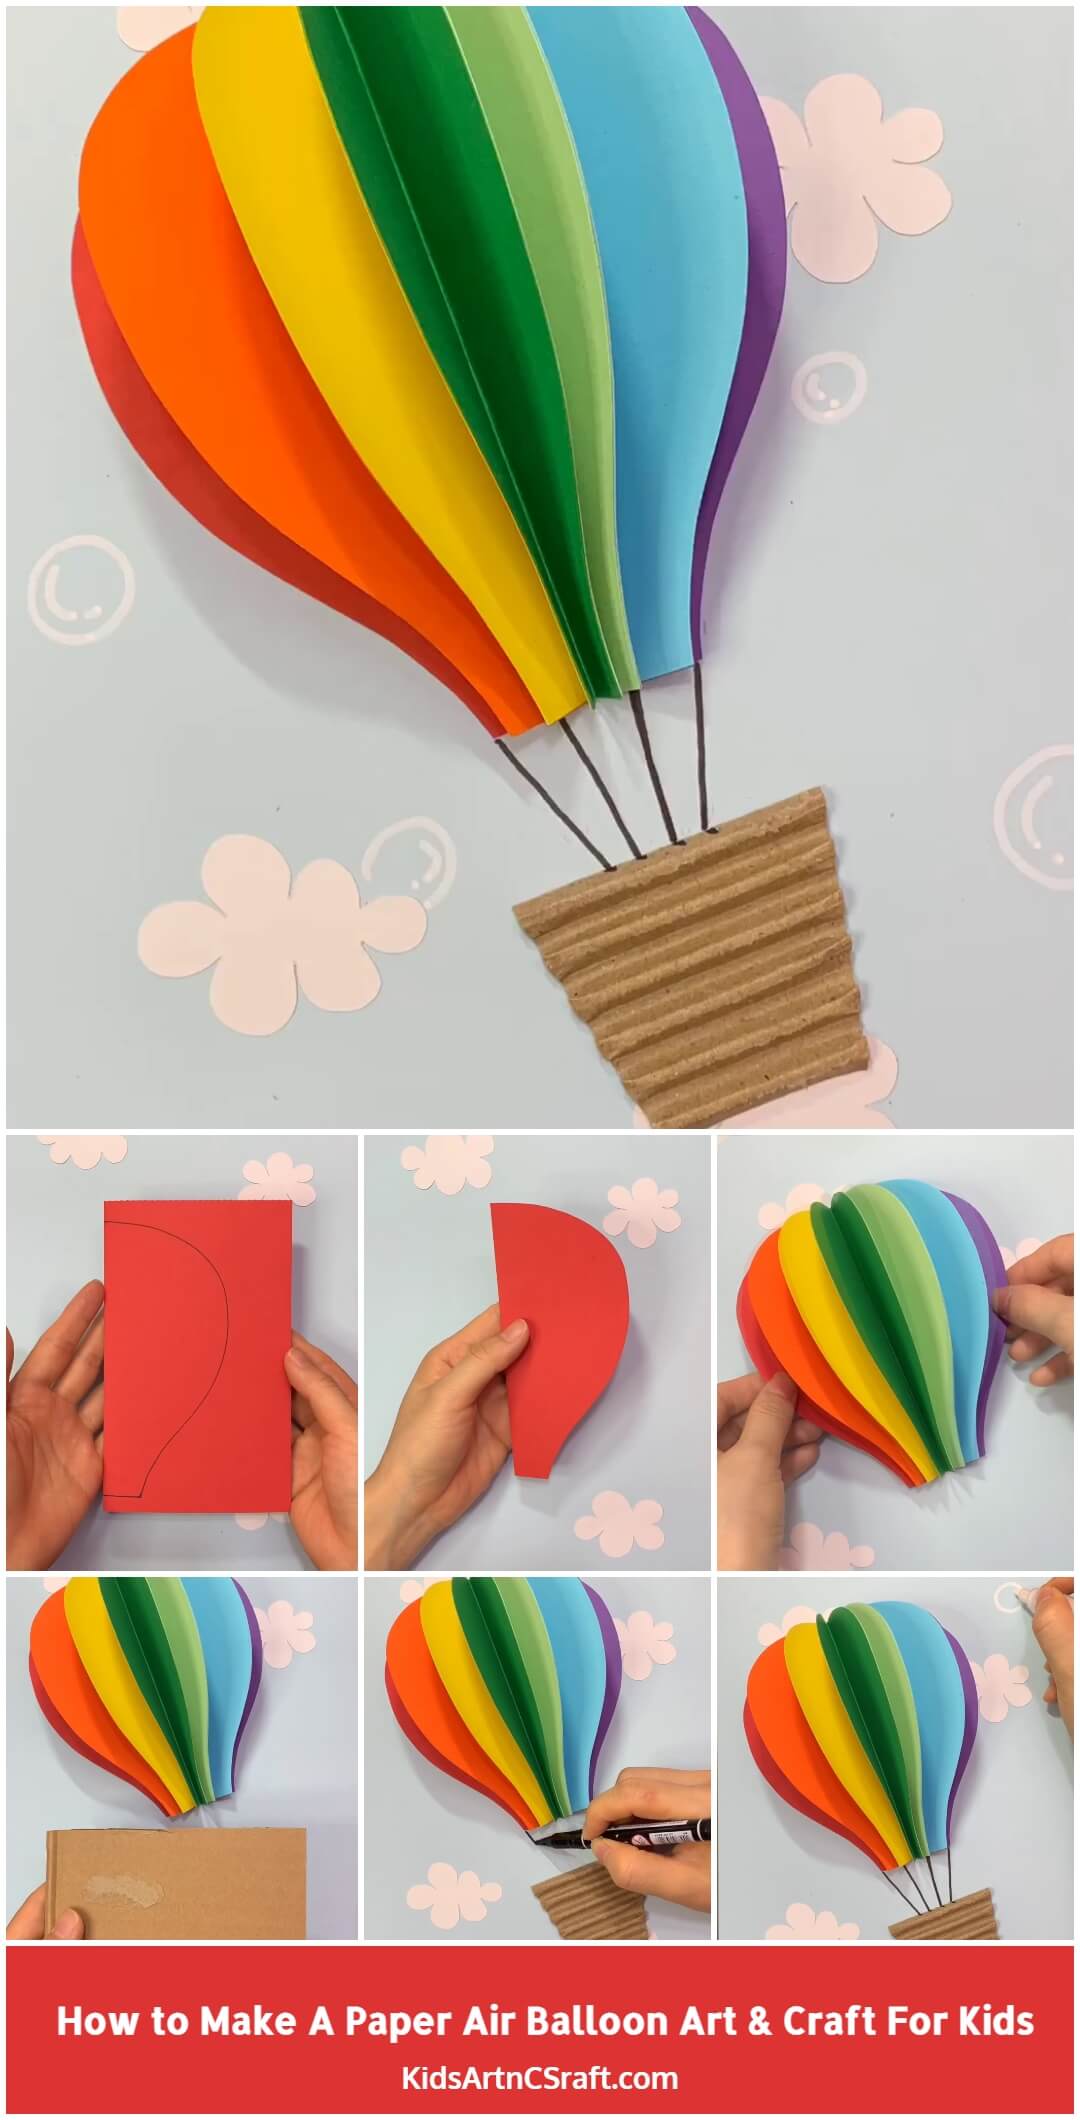 DIY How to Make Air Balloon from Paper Art & Craft For Kids